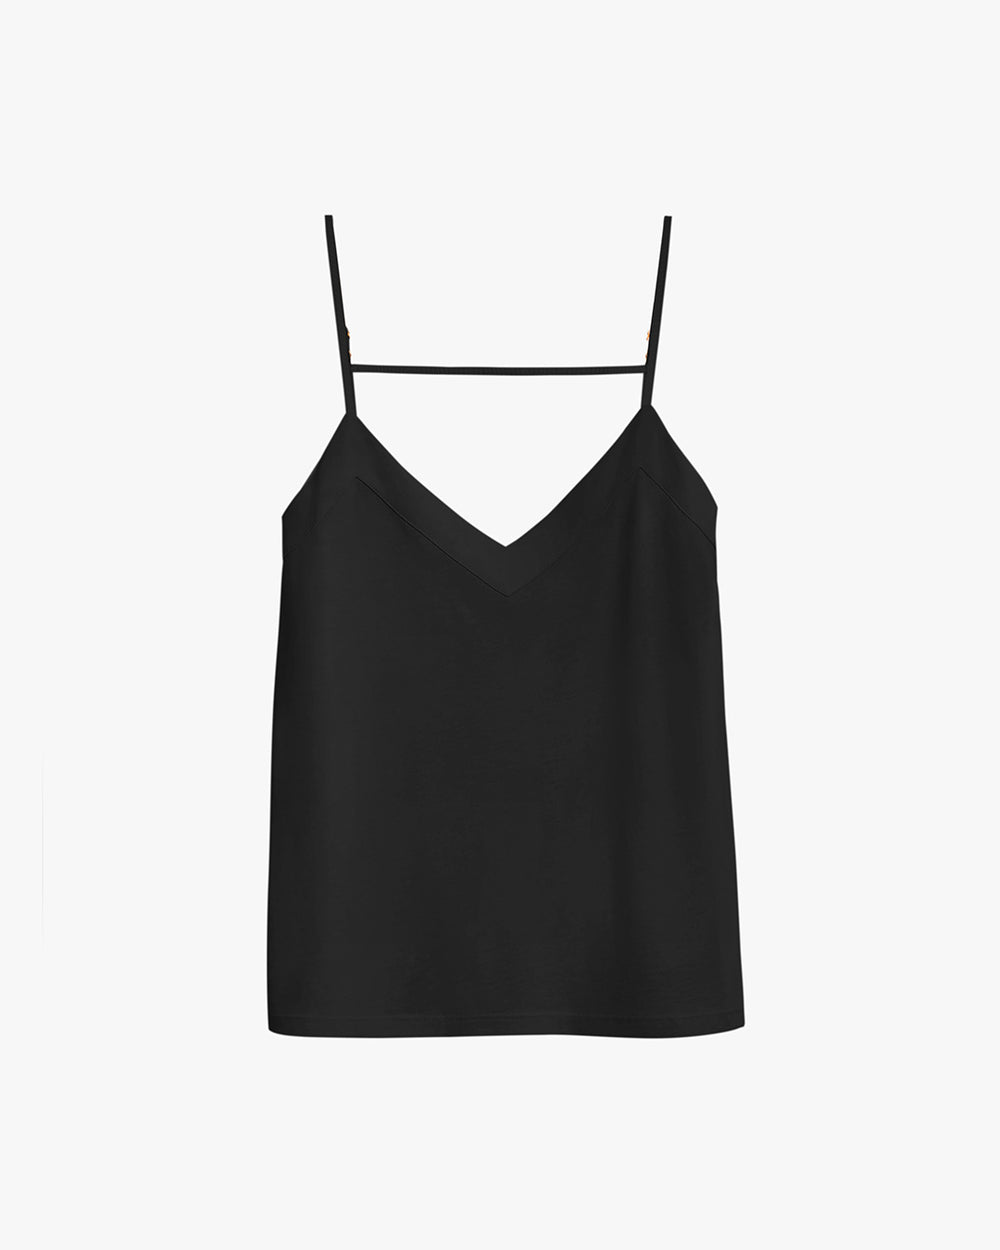 Sleeveless top with thin straps and a V-neckline.